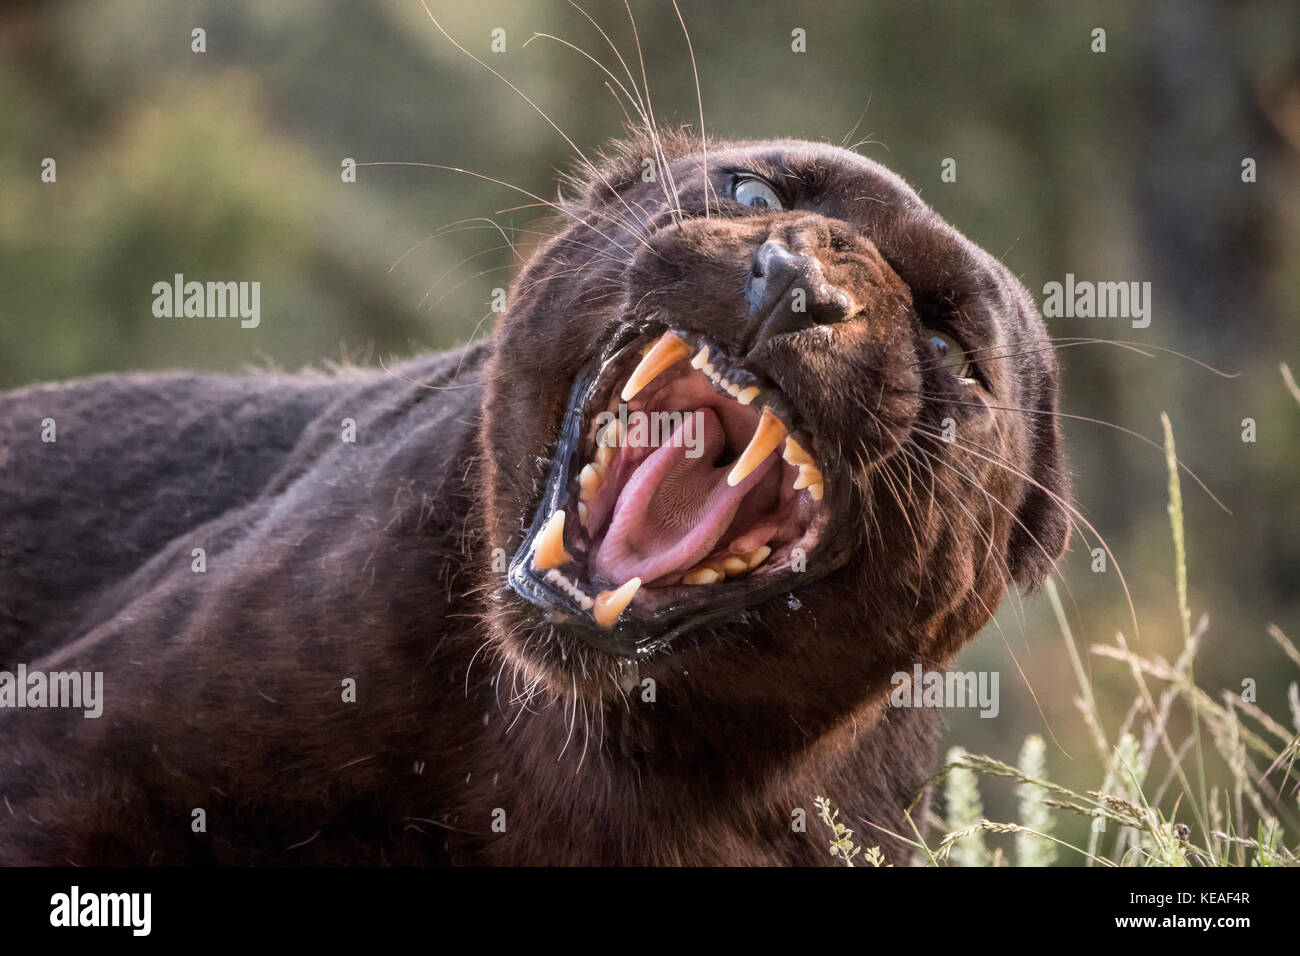 Black panther growling, showing its sharp teeth, near Bozeman, Montana, USA.  A black panther in the Americas is the melanistic color variant of black Stock Photo